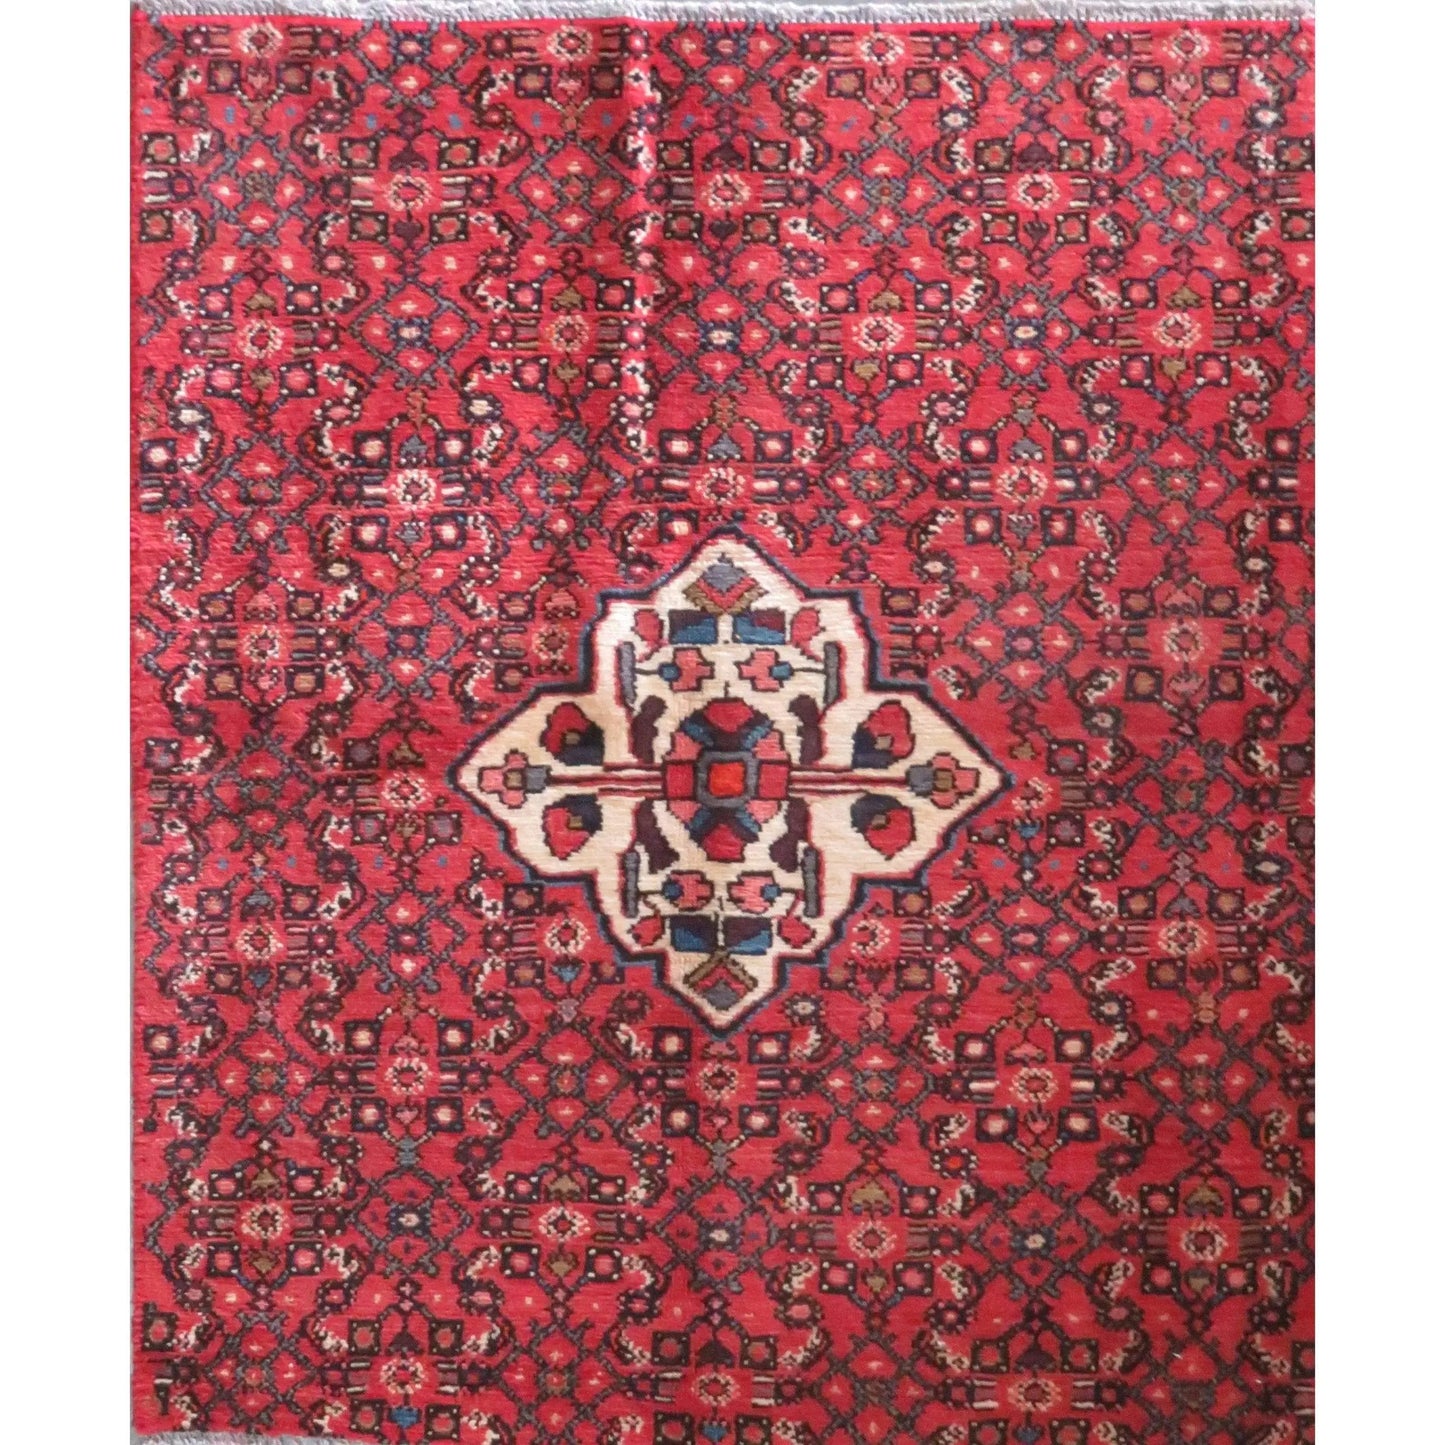 Hand-Knotted Persian Wool Rug _ Luxurious Vintage Design, 3'9" x 3'3", Artisan Crafted